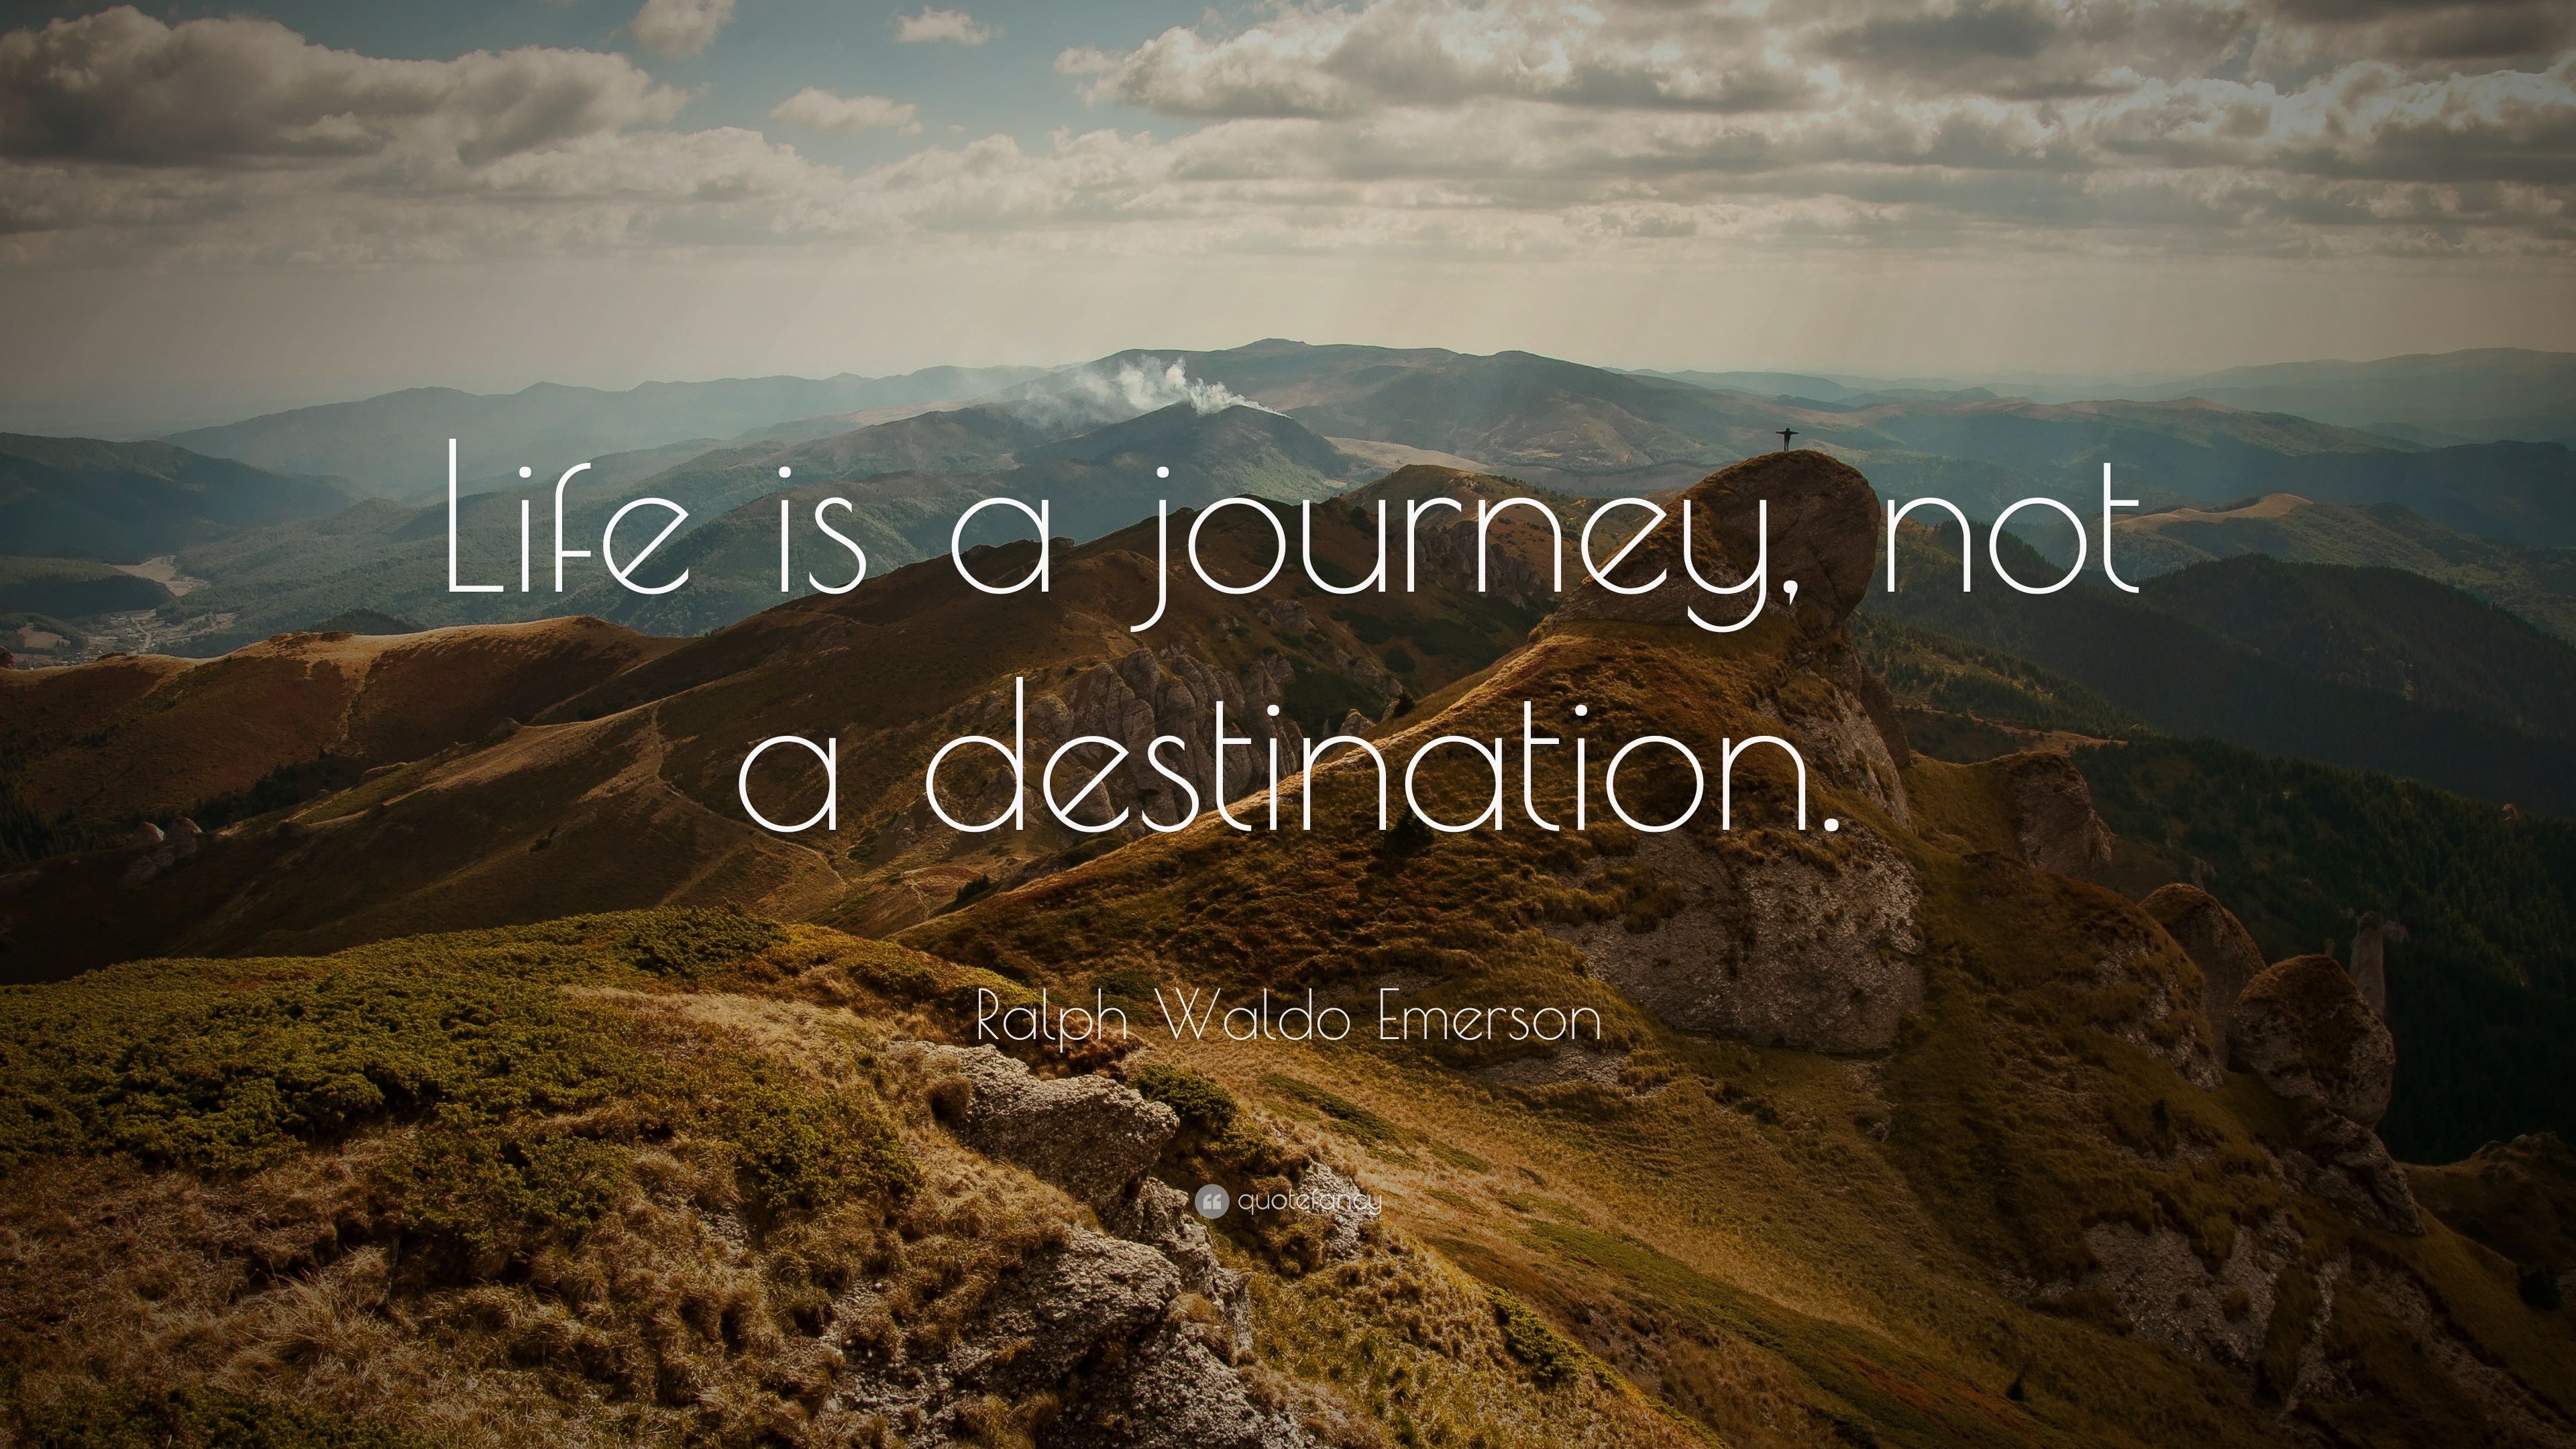 Ralph Waldo Emerson Quote: “Life is a journey, not a destination